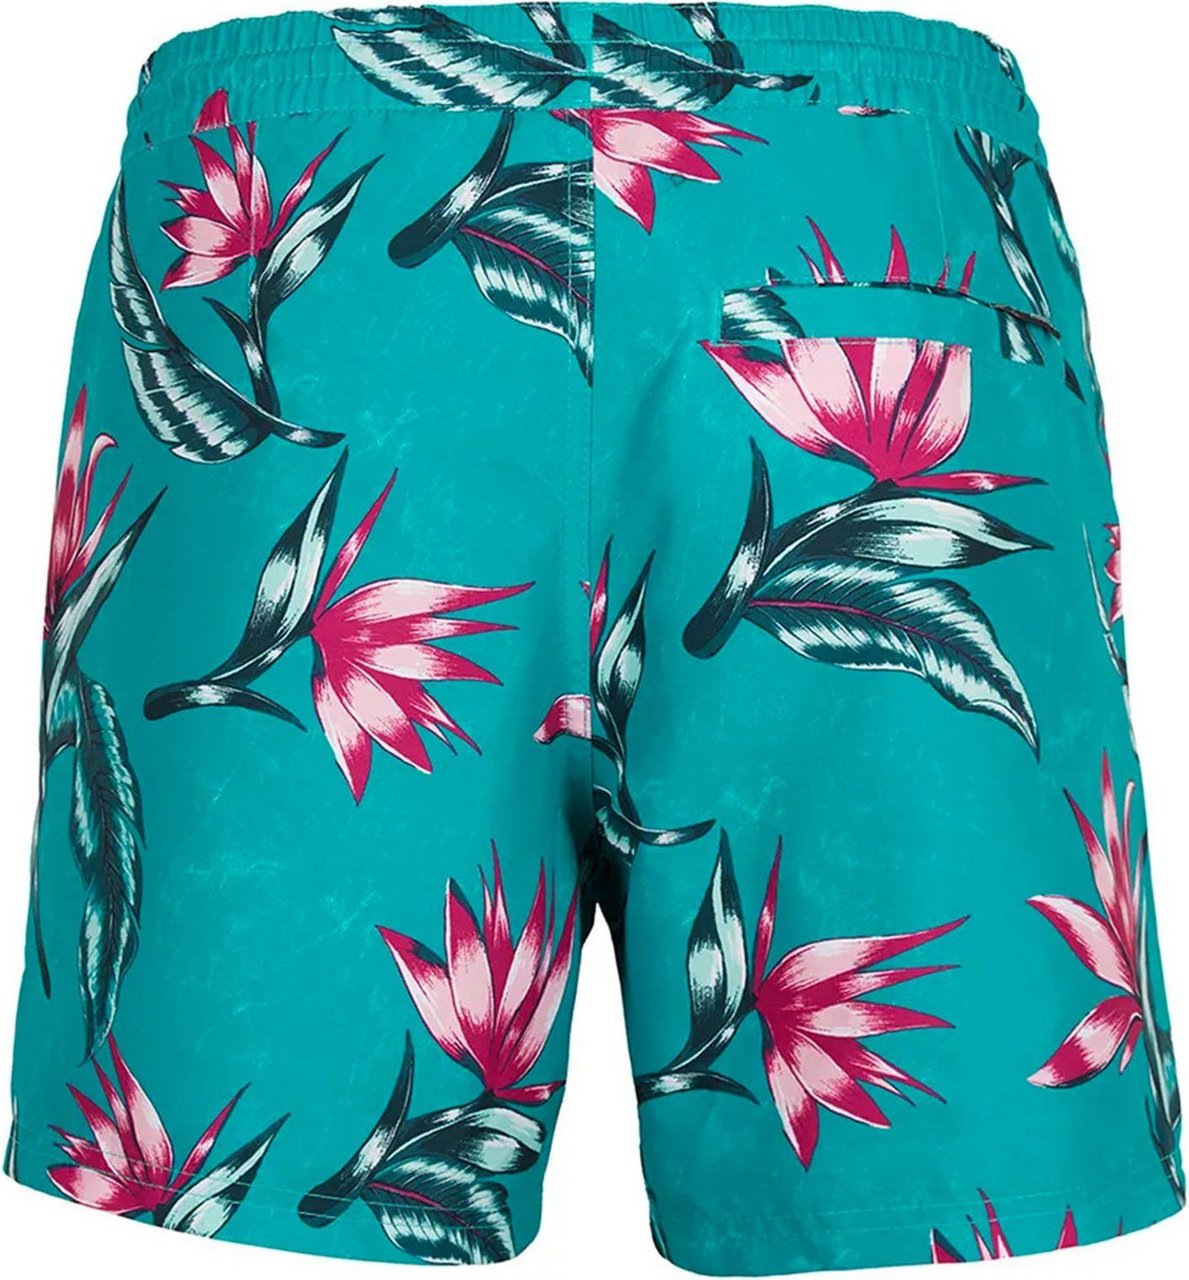 O'neill Swimsuit Man O' Neill Floral Shorts 2800022-35015 Divers